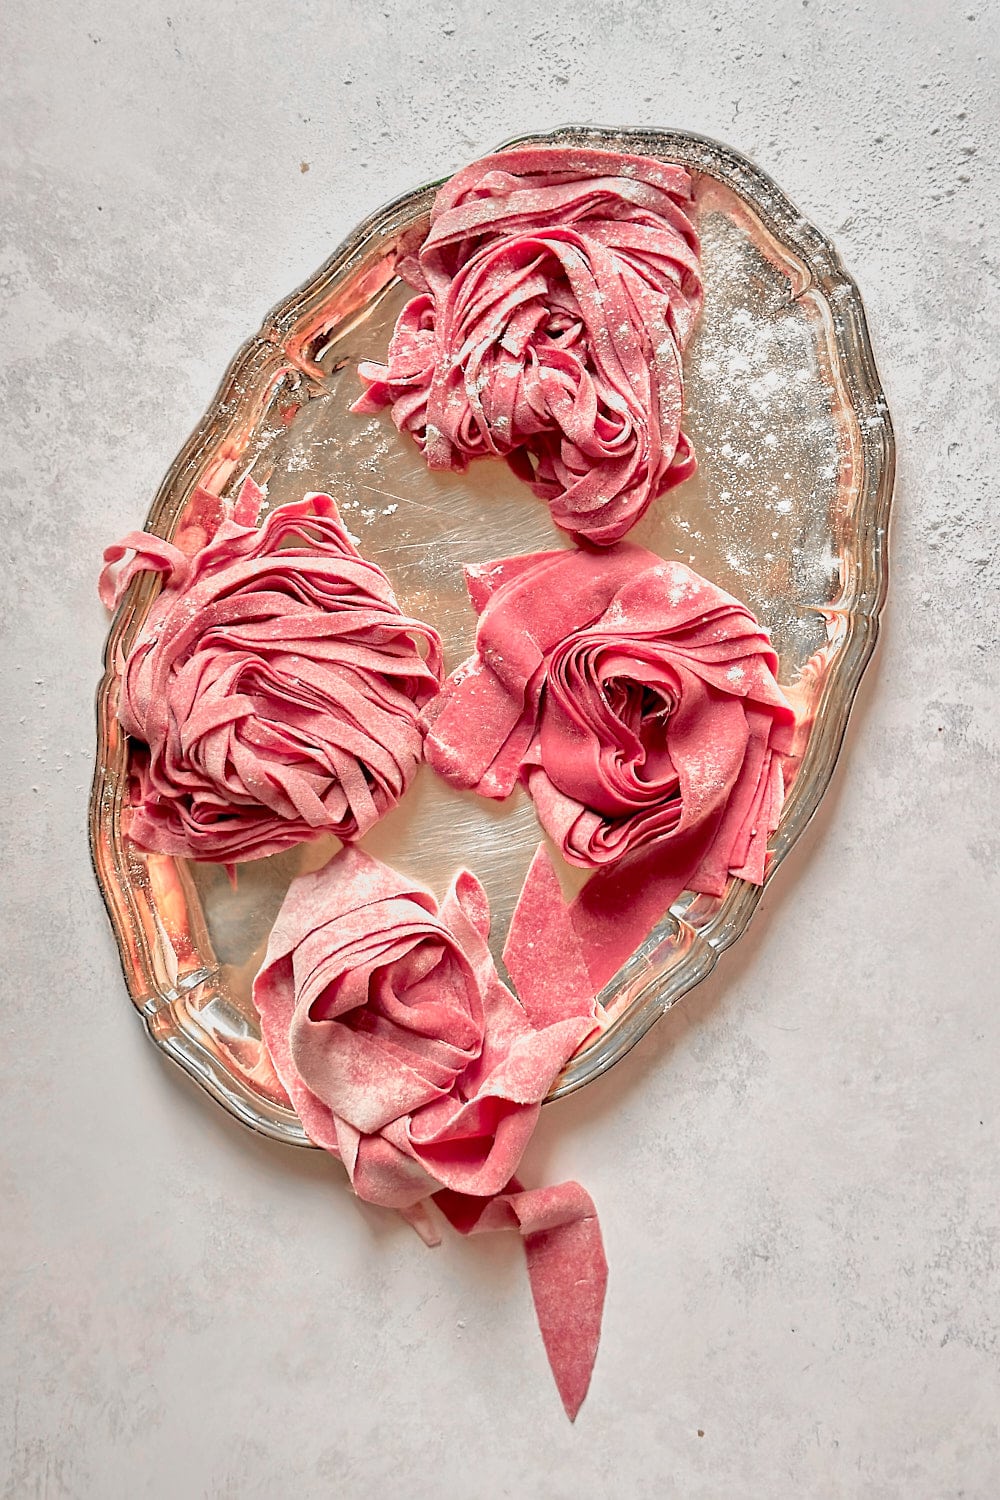 Fresh pink beet pasta on a silver serving tray.